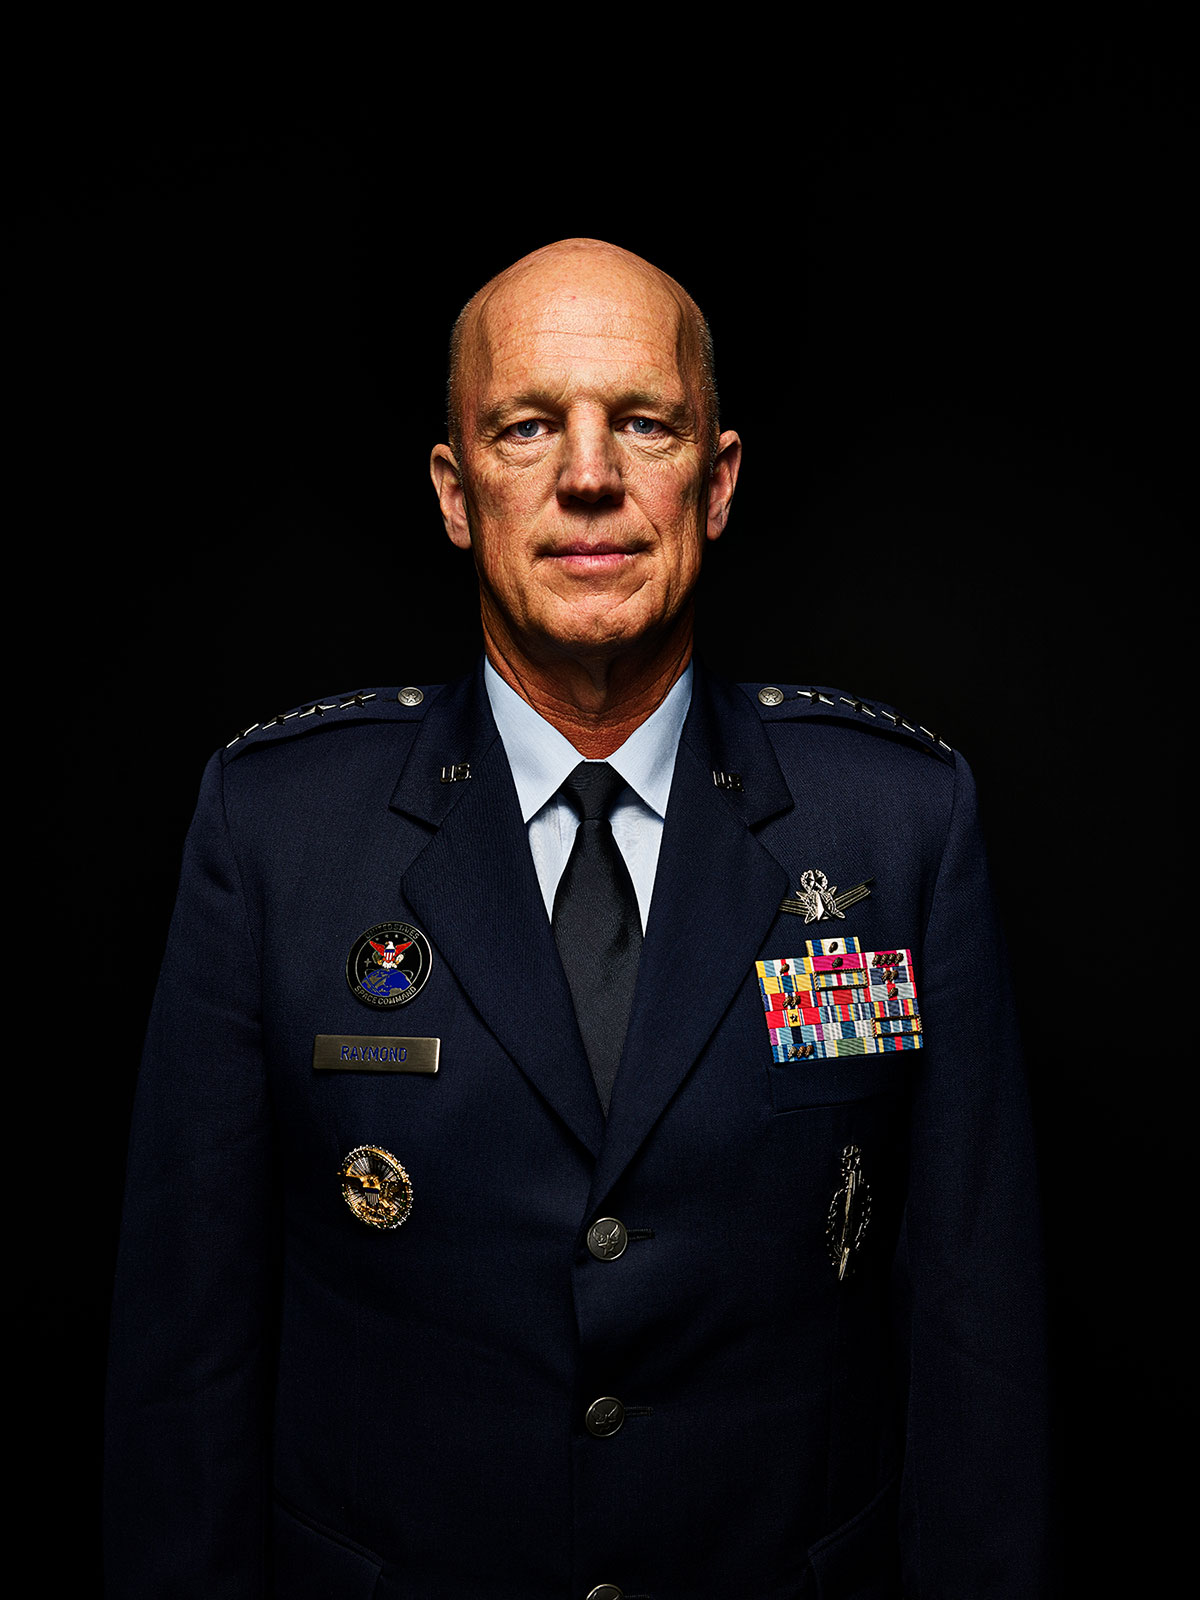 General John “Jay” Raymond, Space Force’s first commanding general, says space-based systems form the backbone of modern life. (Spencer Lowell for TIME)